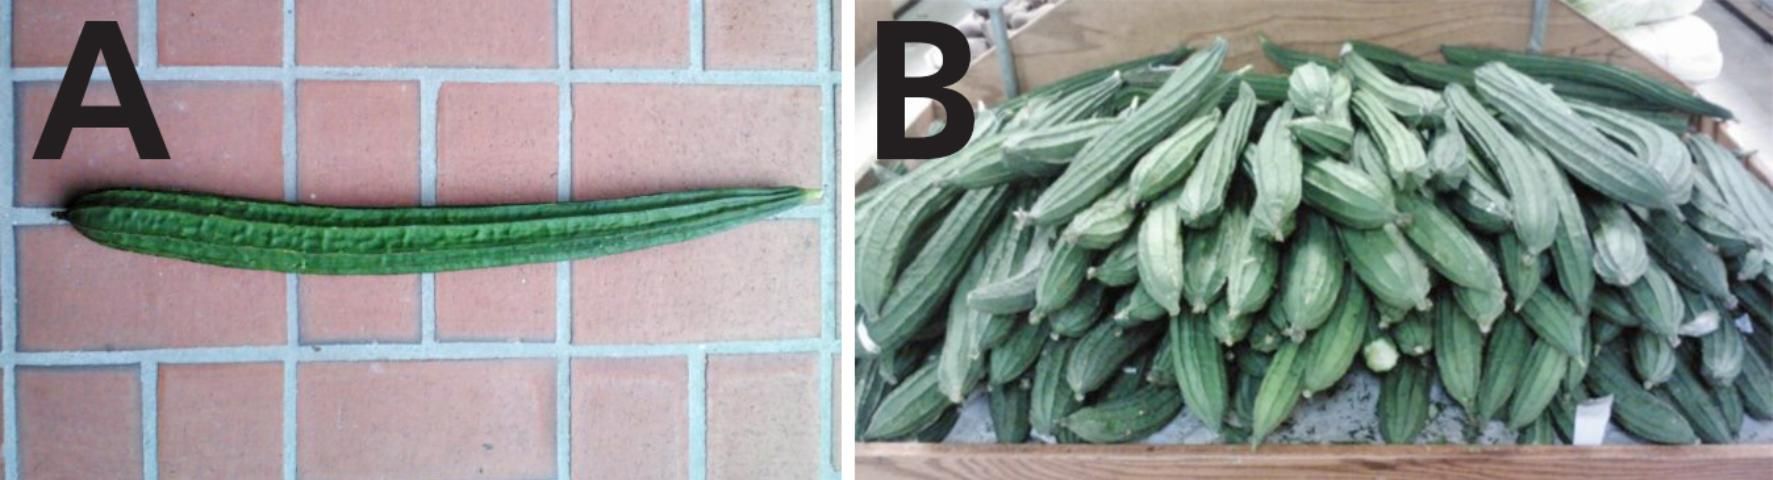 Figure 2. (a) Fresh immature fruit of angled luffa. (b) The fruit of angled luffa have a longer shelf life and are more tolerant to shipping than those of smooth luffa. The angled luffa is more popular in Florida's commercial farms for Asian vegetable crops.